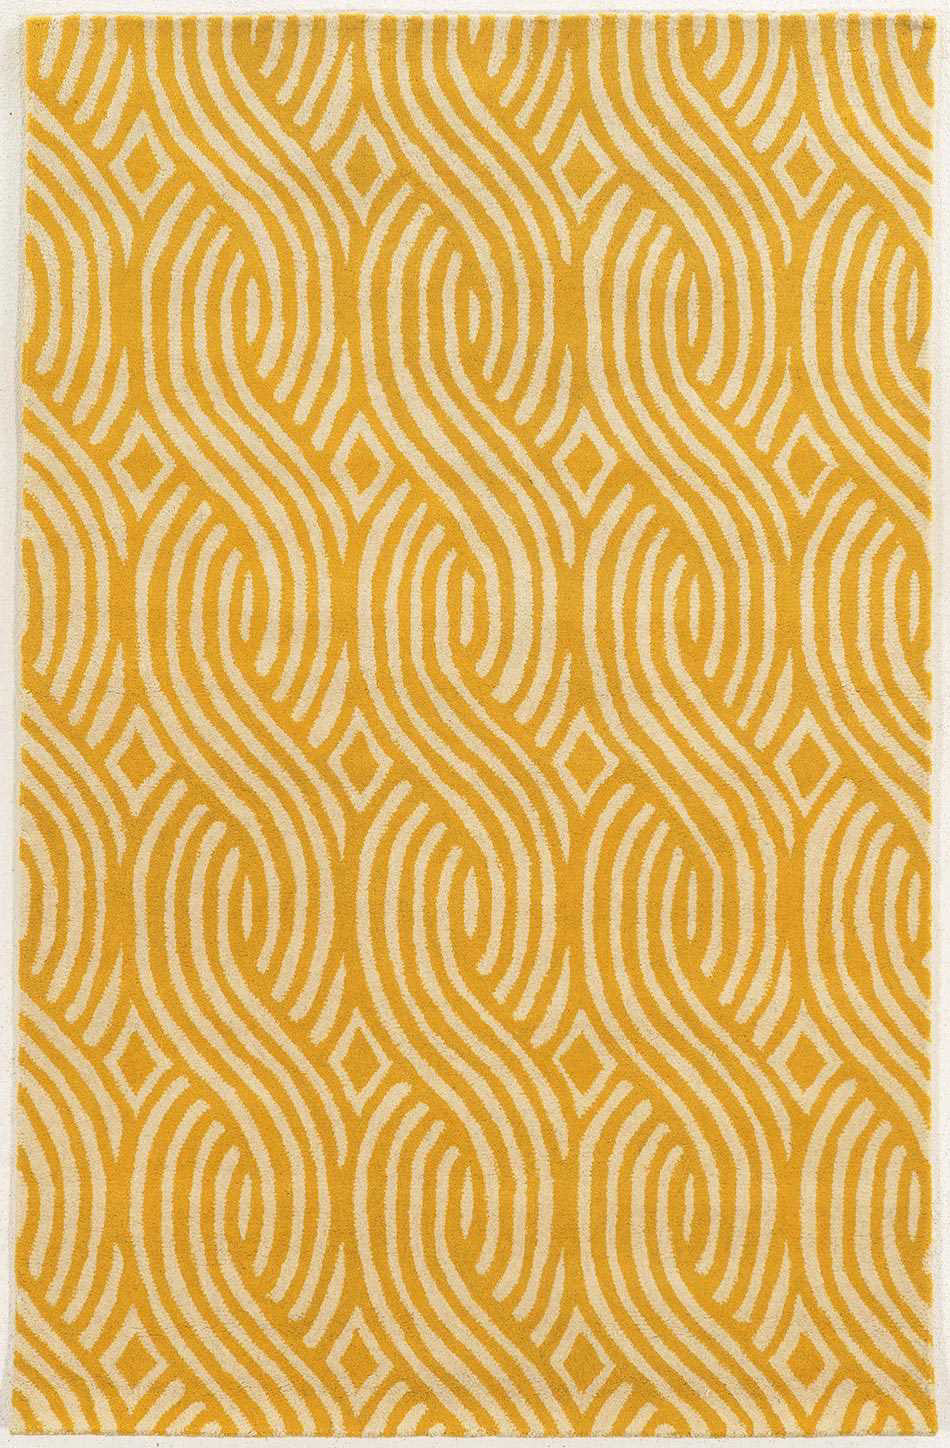 Rizzy Julian Pointe JP8614 Ivory/Gold Area Rug main image